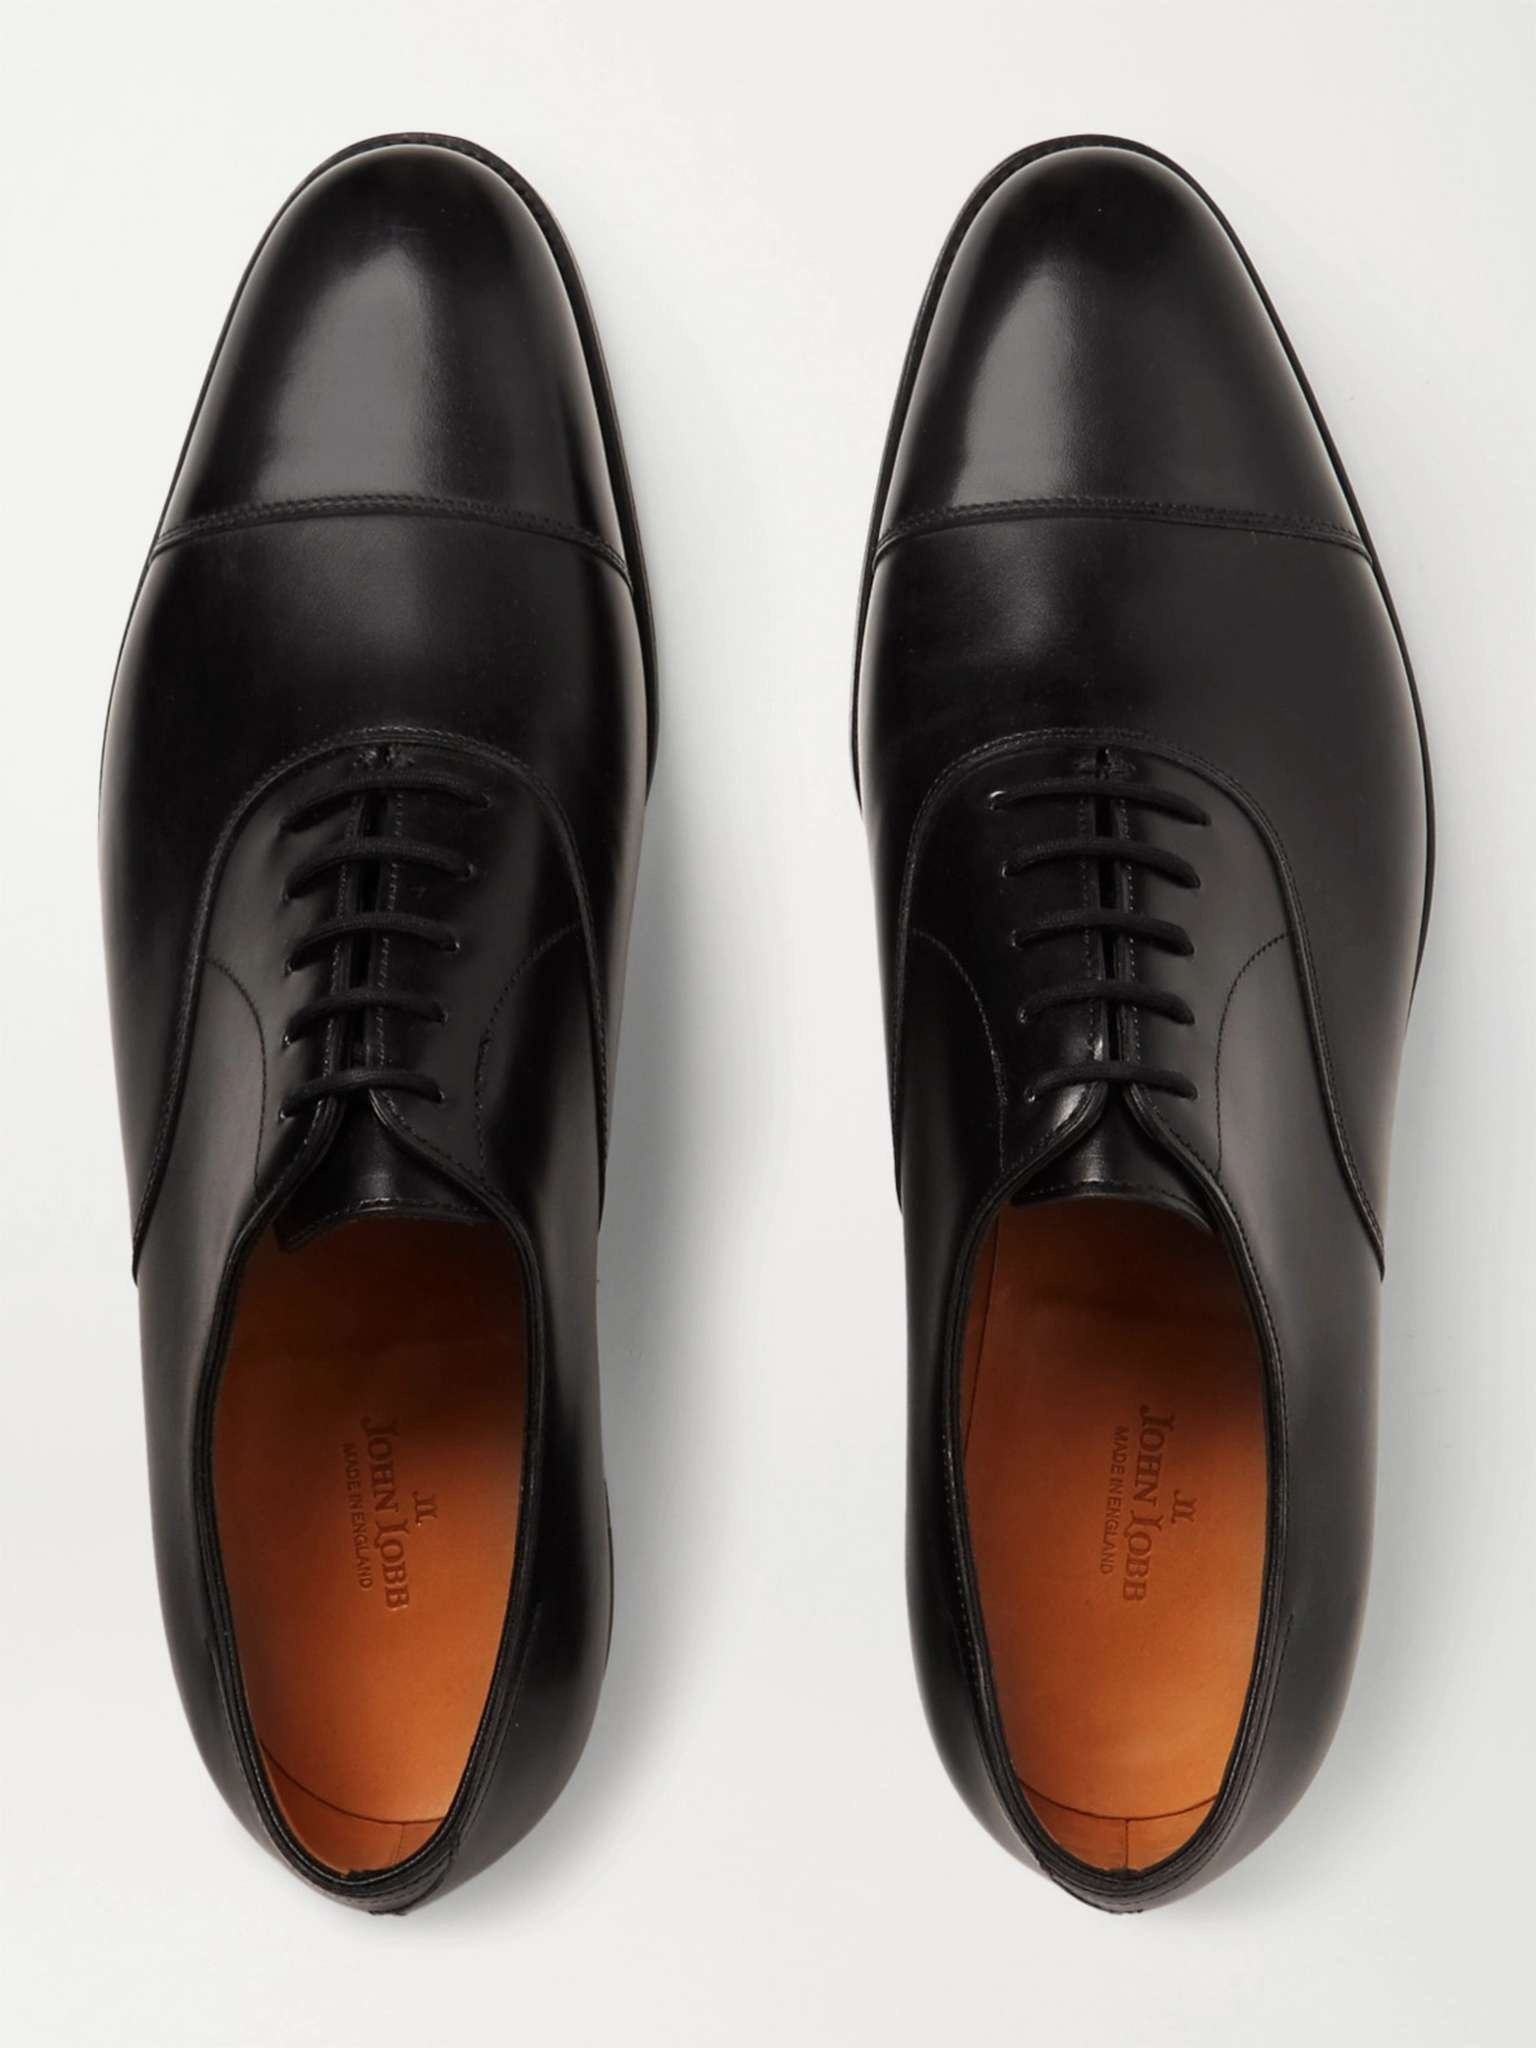 City II Leather Oxford Shoes - 7